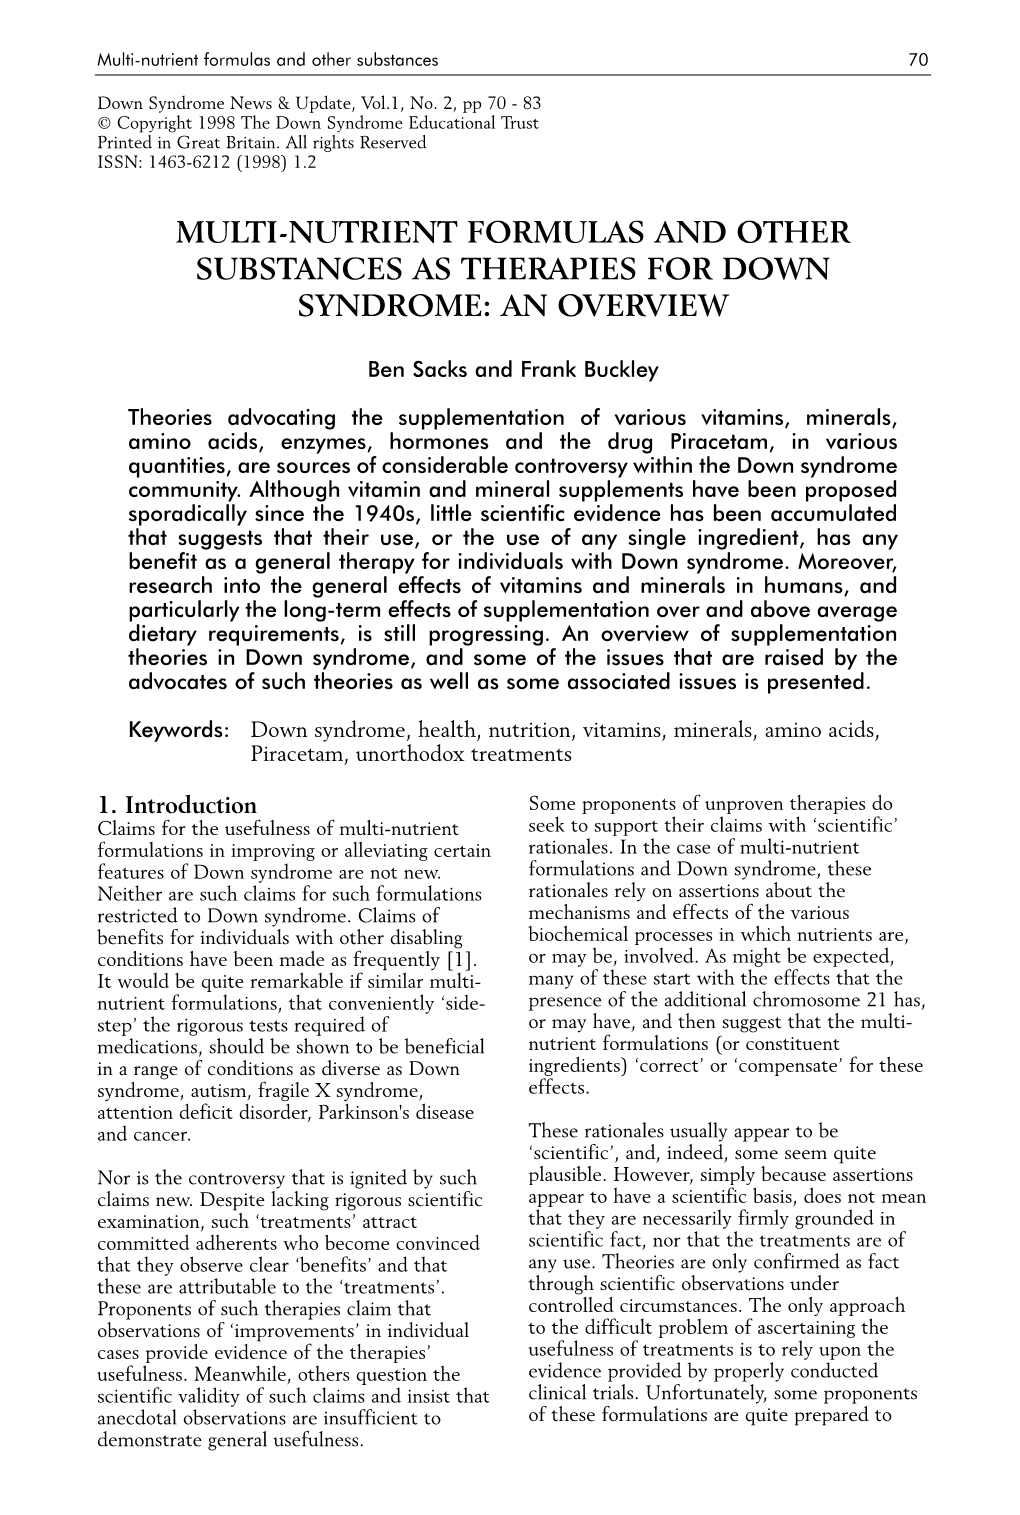 Down Syndrome News and Update Volume 1 Number 2 Pages 70-83